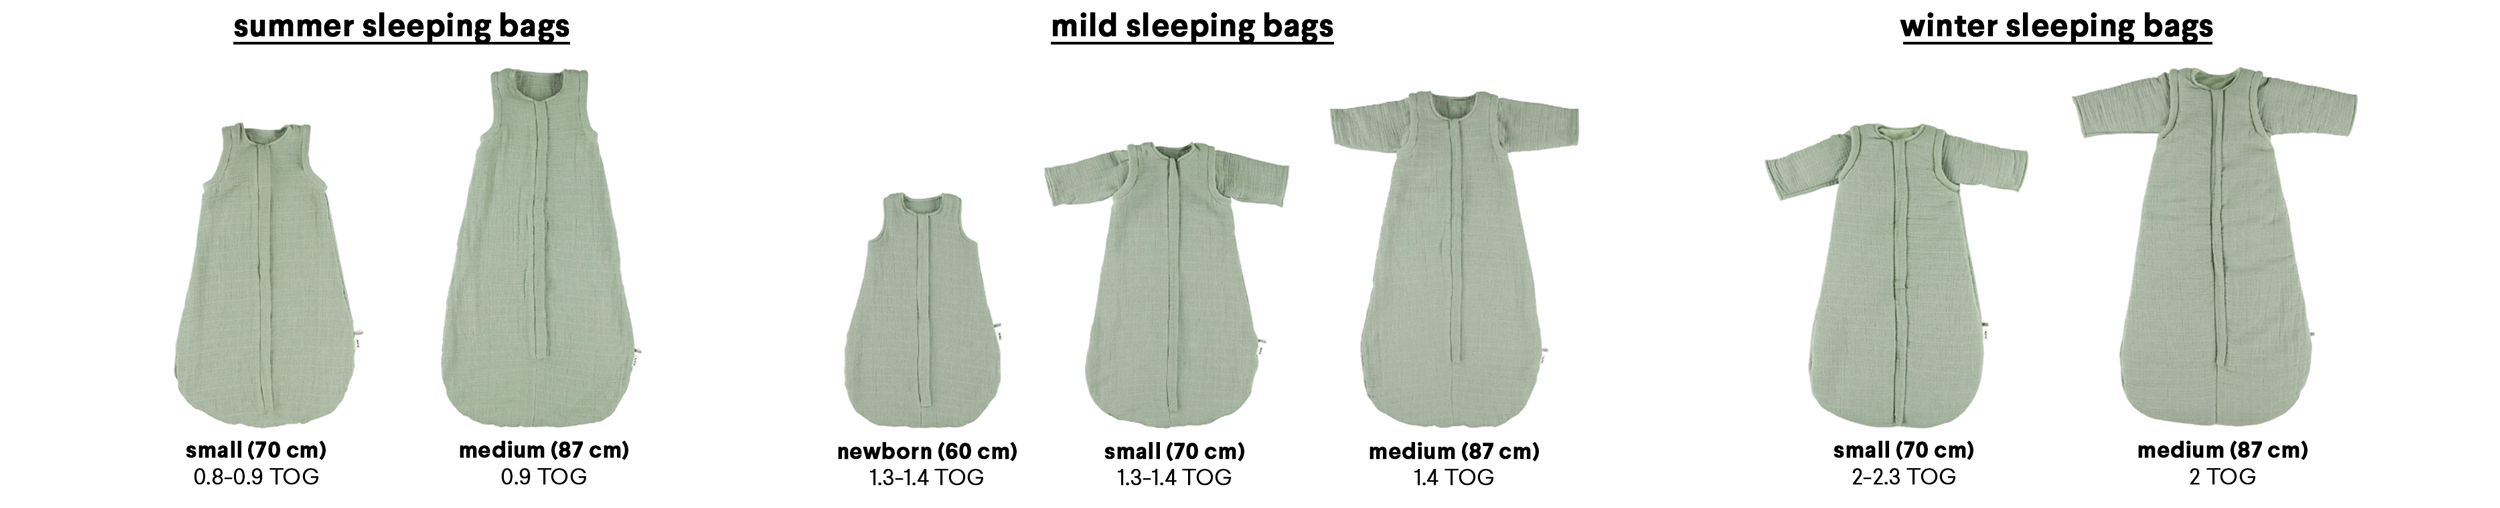 Overview sleeping bags